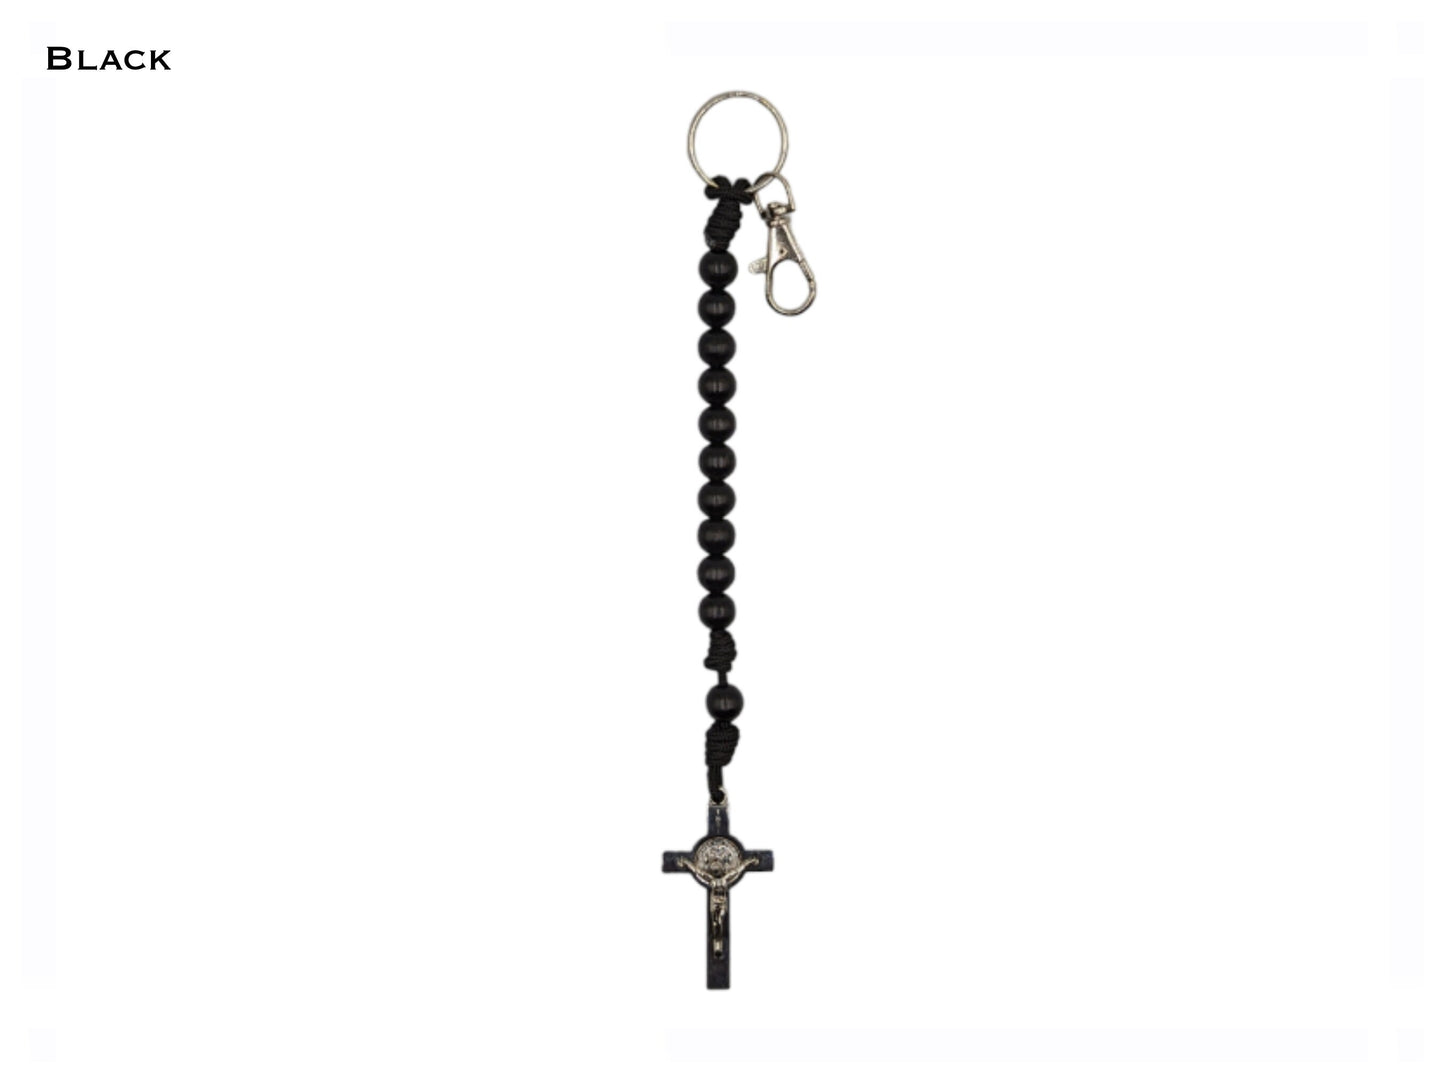 Paracord Rosary keyring, One decade metal & knot Rosary, Strong, Catholic Rosary, Pilgrimages, Knotted Rosary, Unbreakable, Waterproof